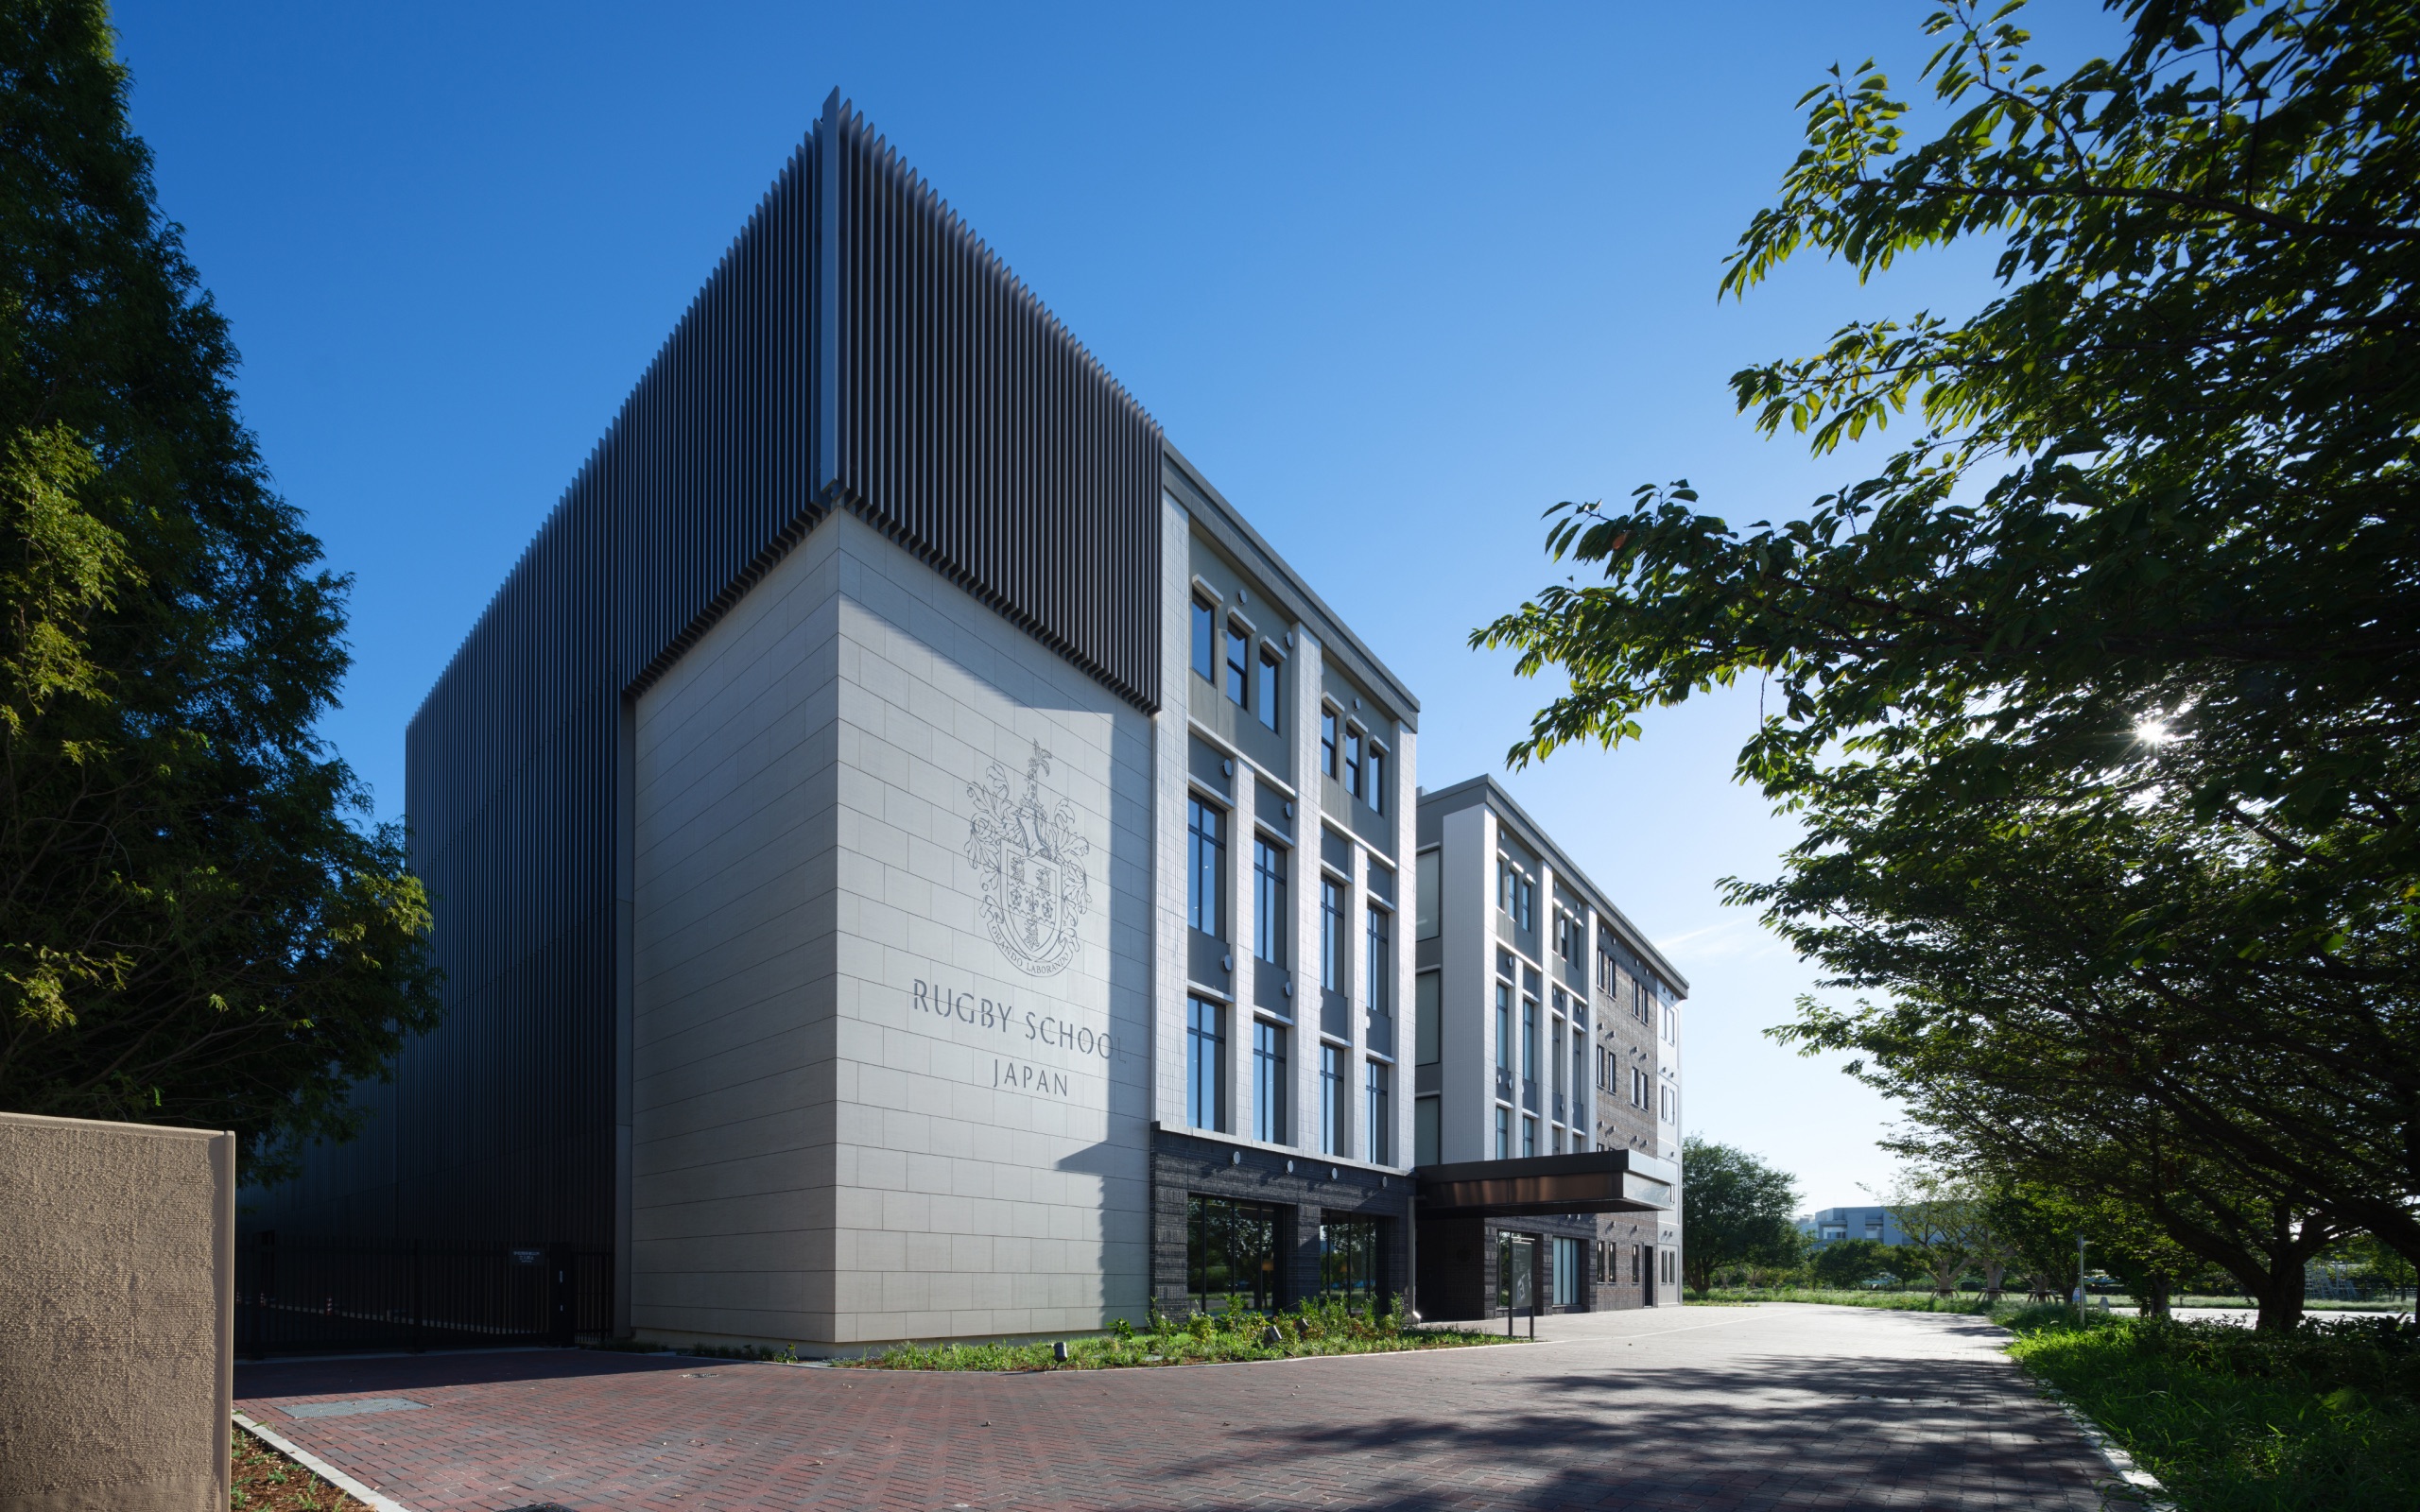 clarence-education-asia-rugby-school-japan-main-building-outside